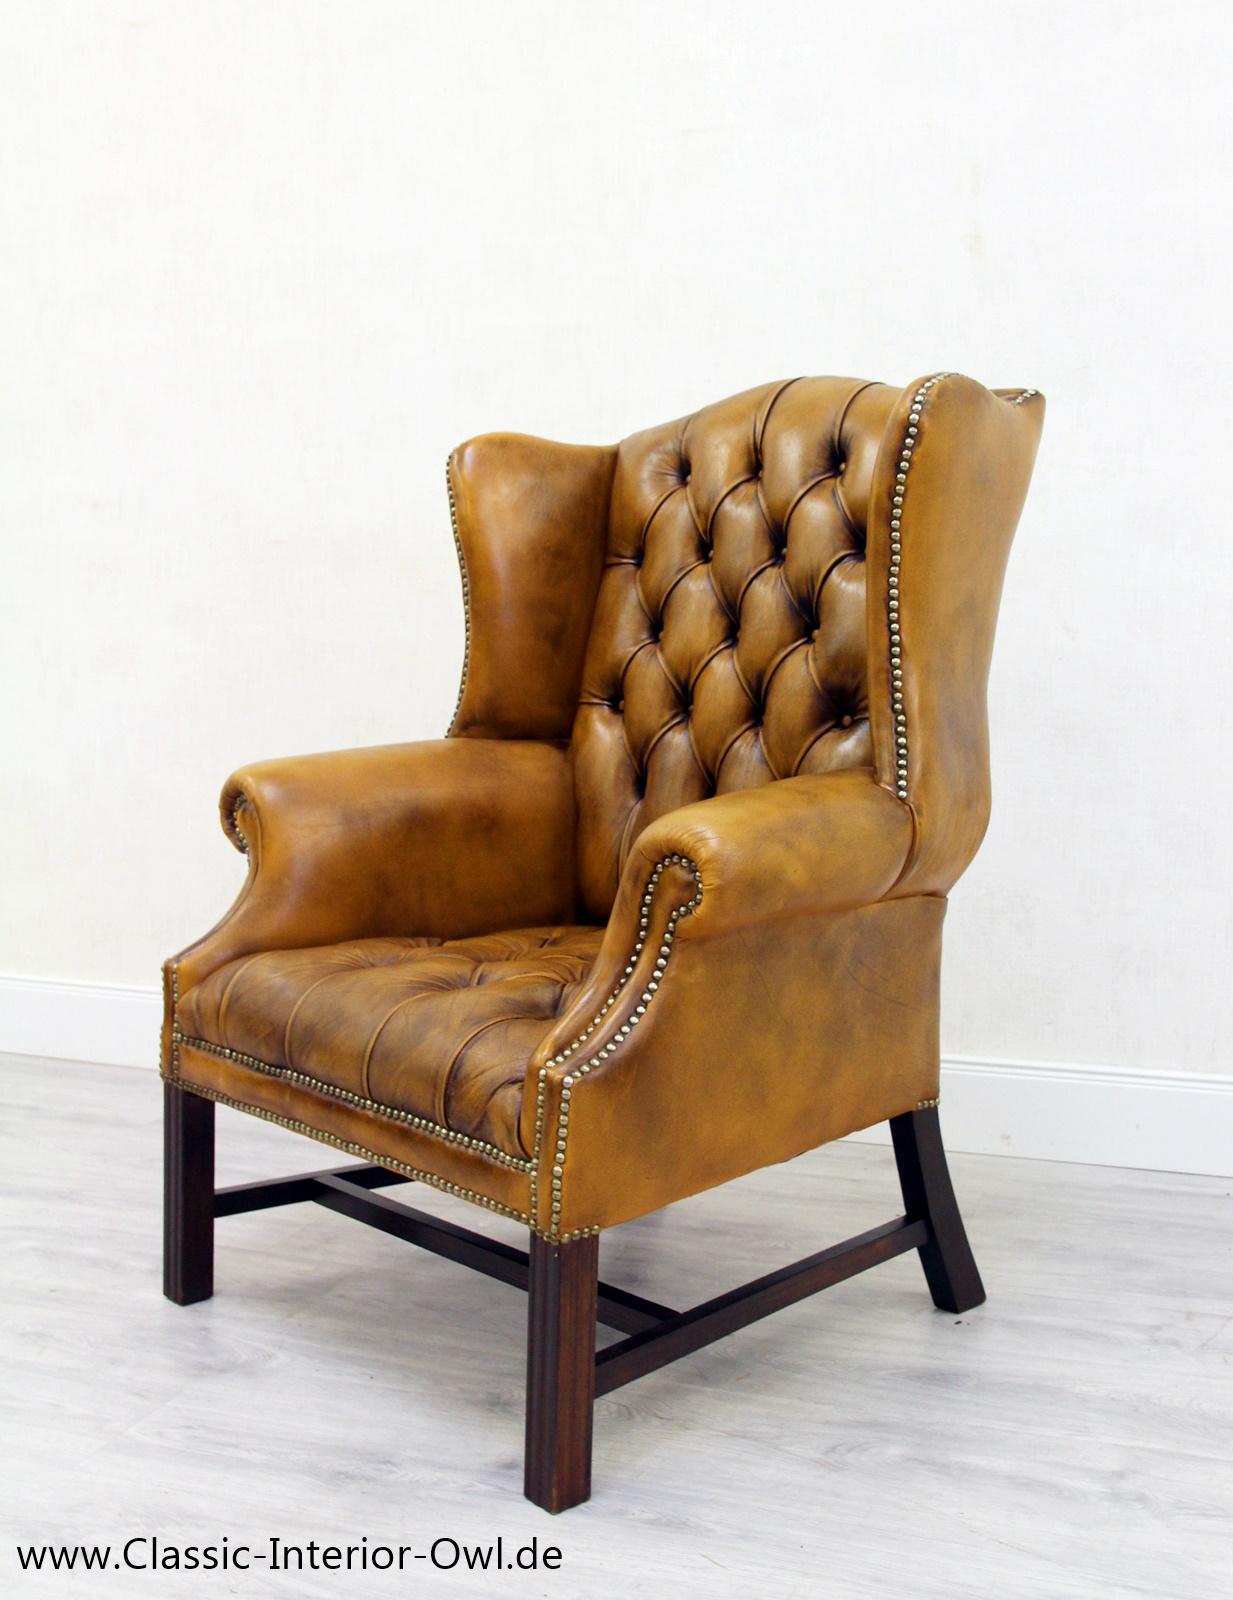 Chesterfield Ohrensessel Clubsessel Stuhle Sessel Barock Antik In Excellent Condition For Sale In Lage, DE